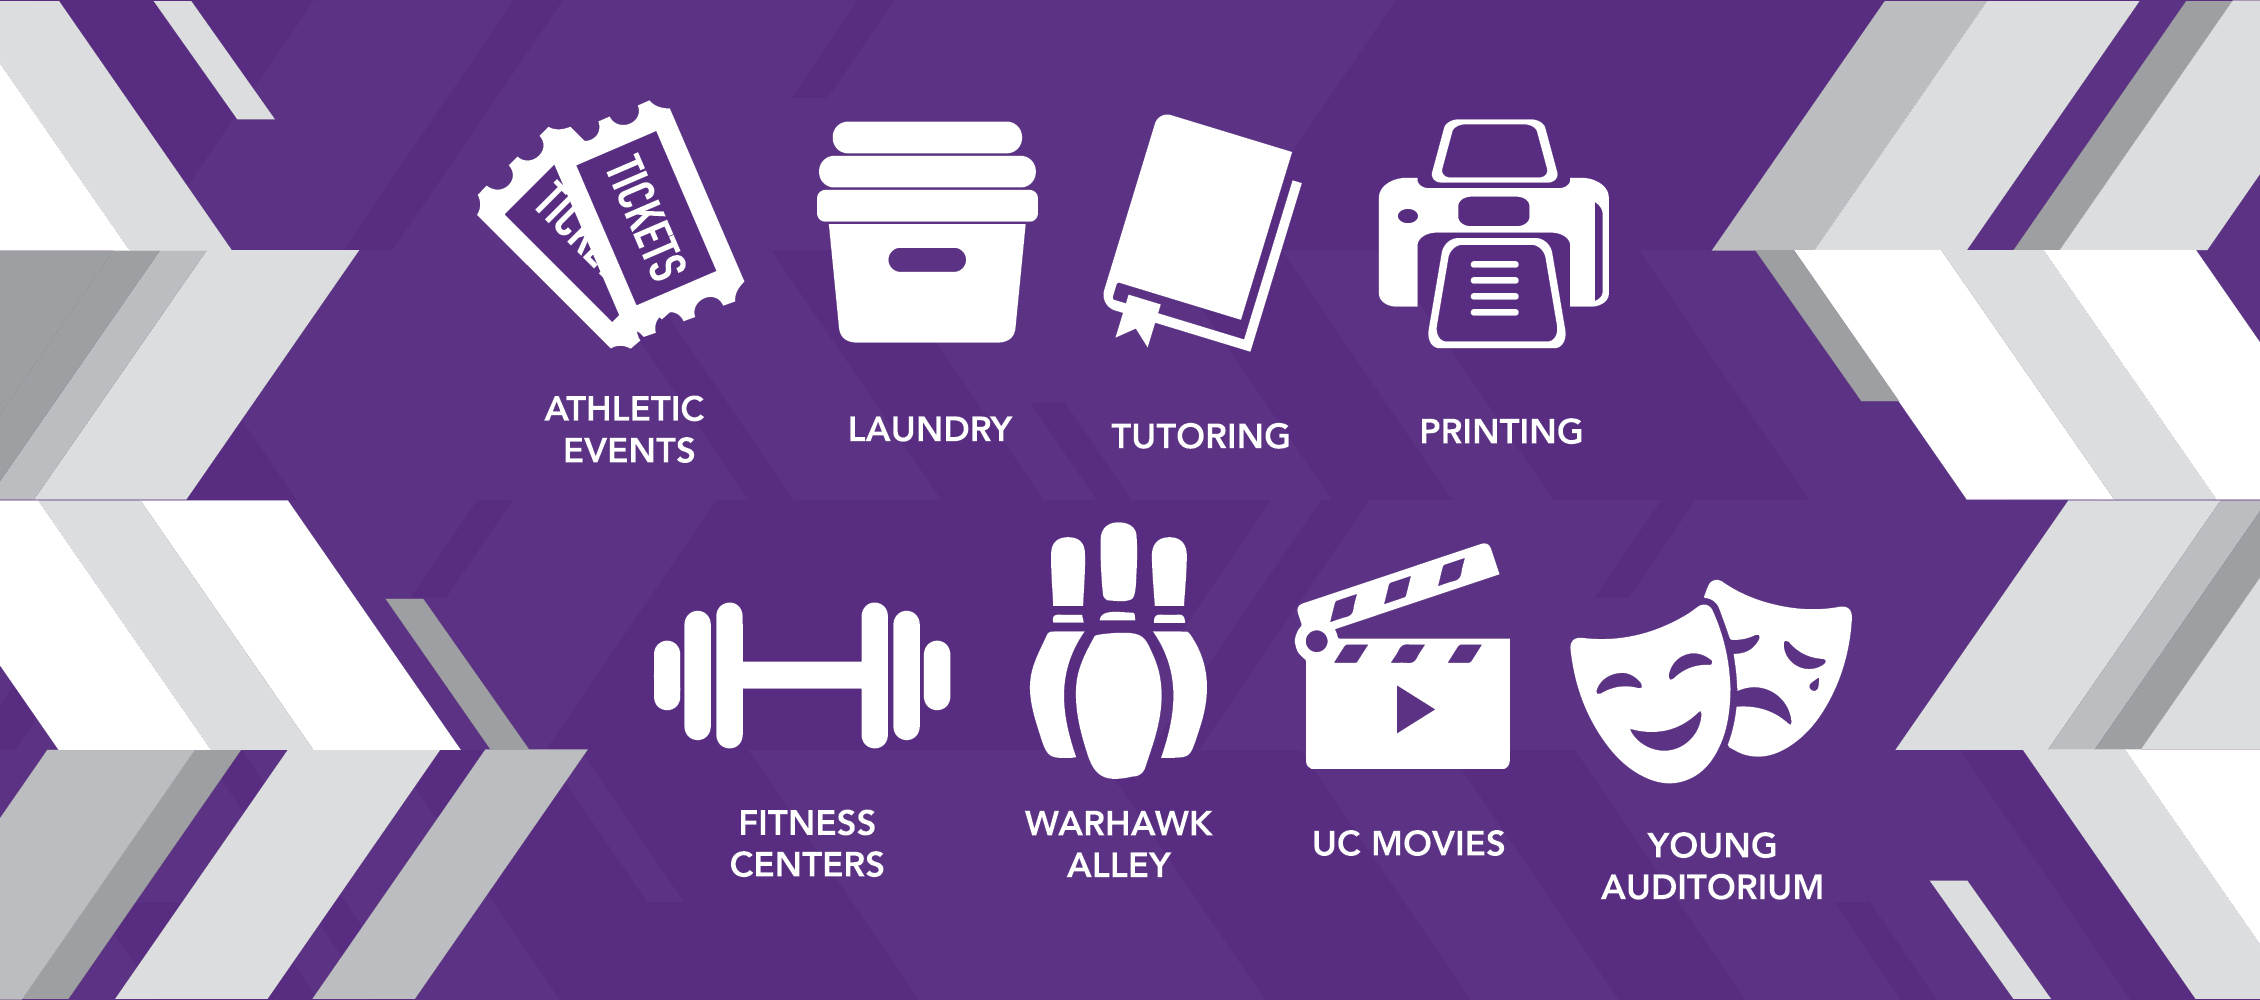 Graphics of a printer, tickets, fitness equipment, and bowling pins